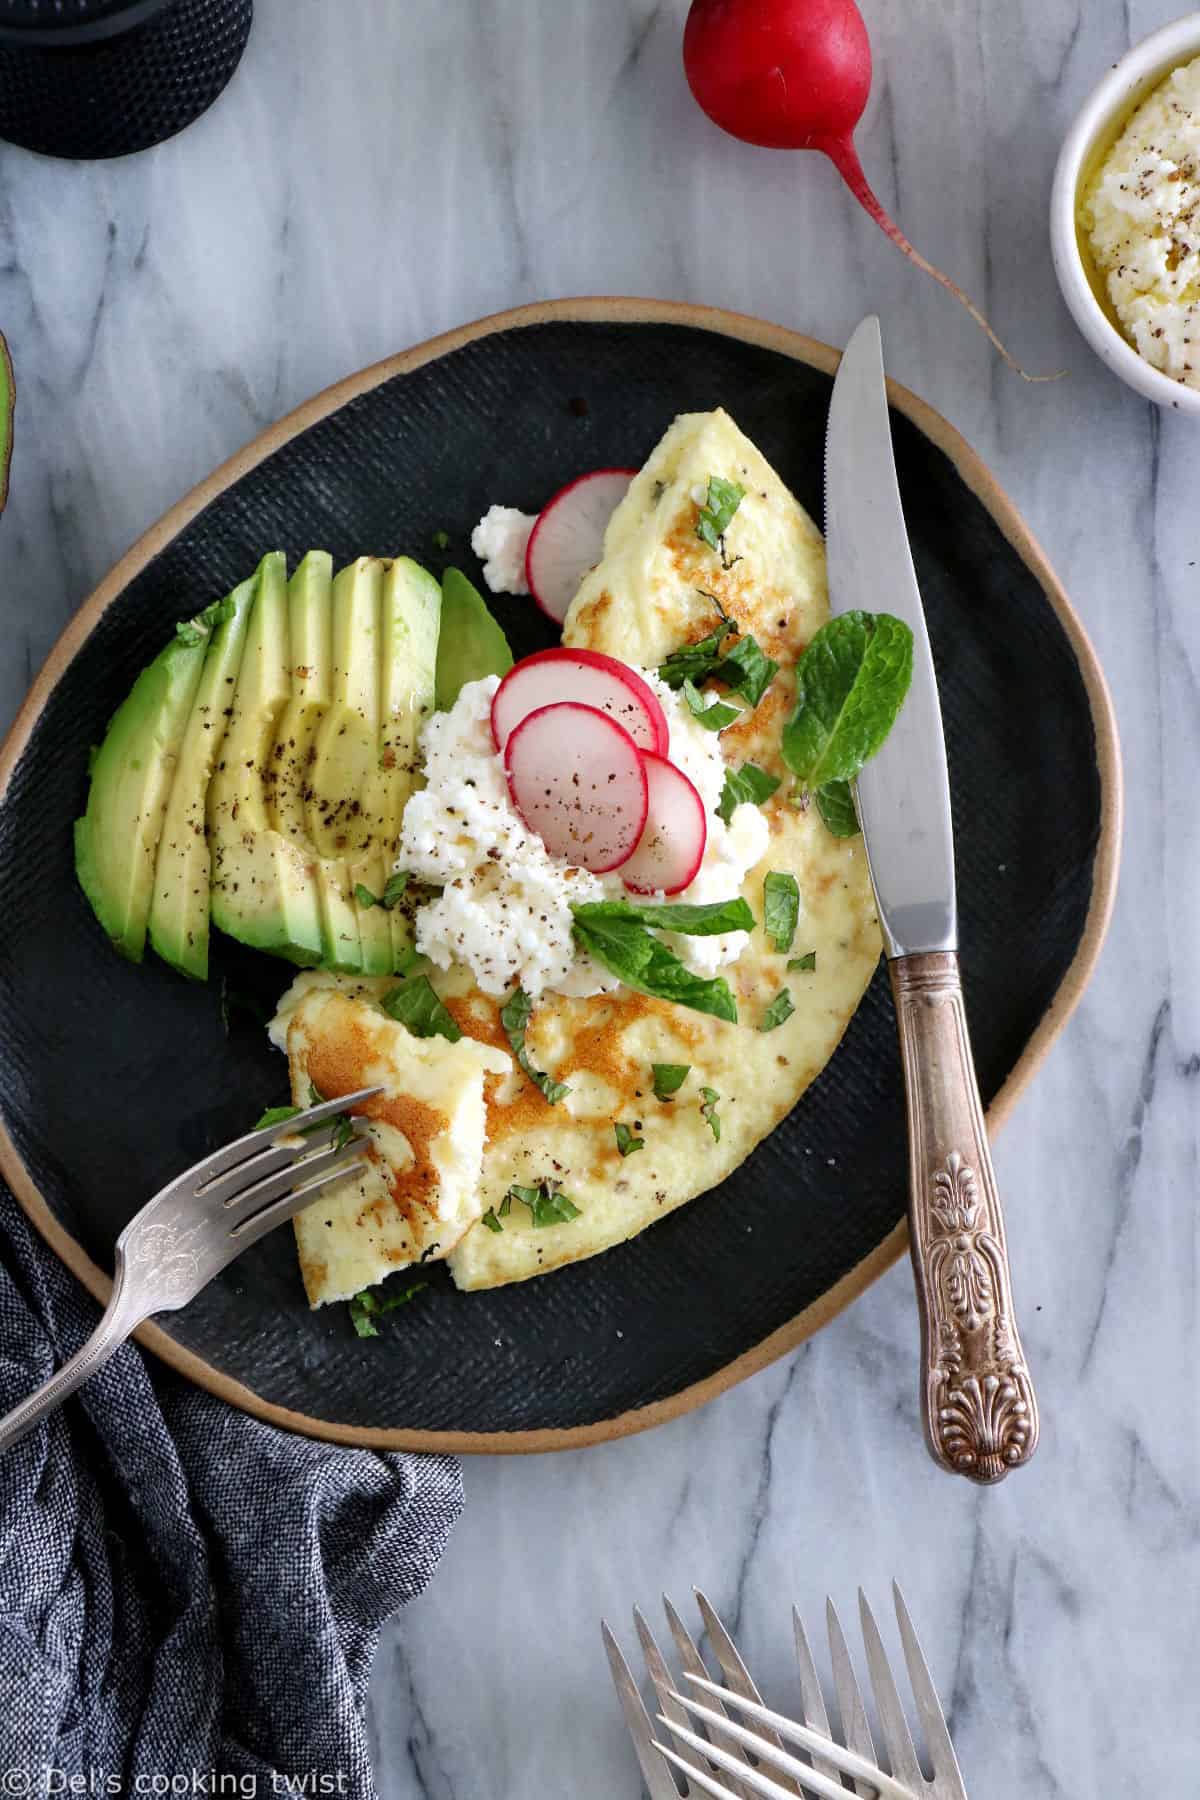 This simple mint ricotta omelet is light, fluffy, and subtly flavored with fresh mint leaves. It doesn't get any more complicated than that.